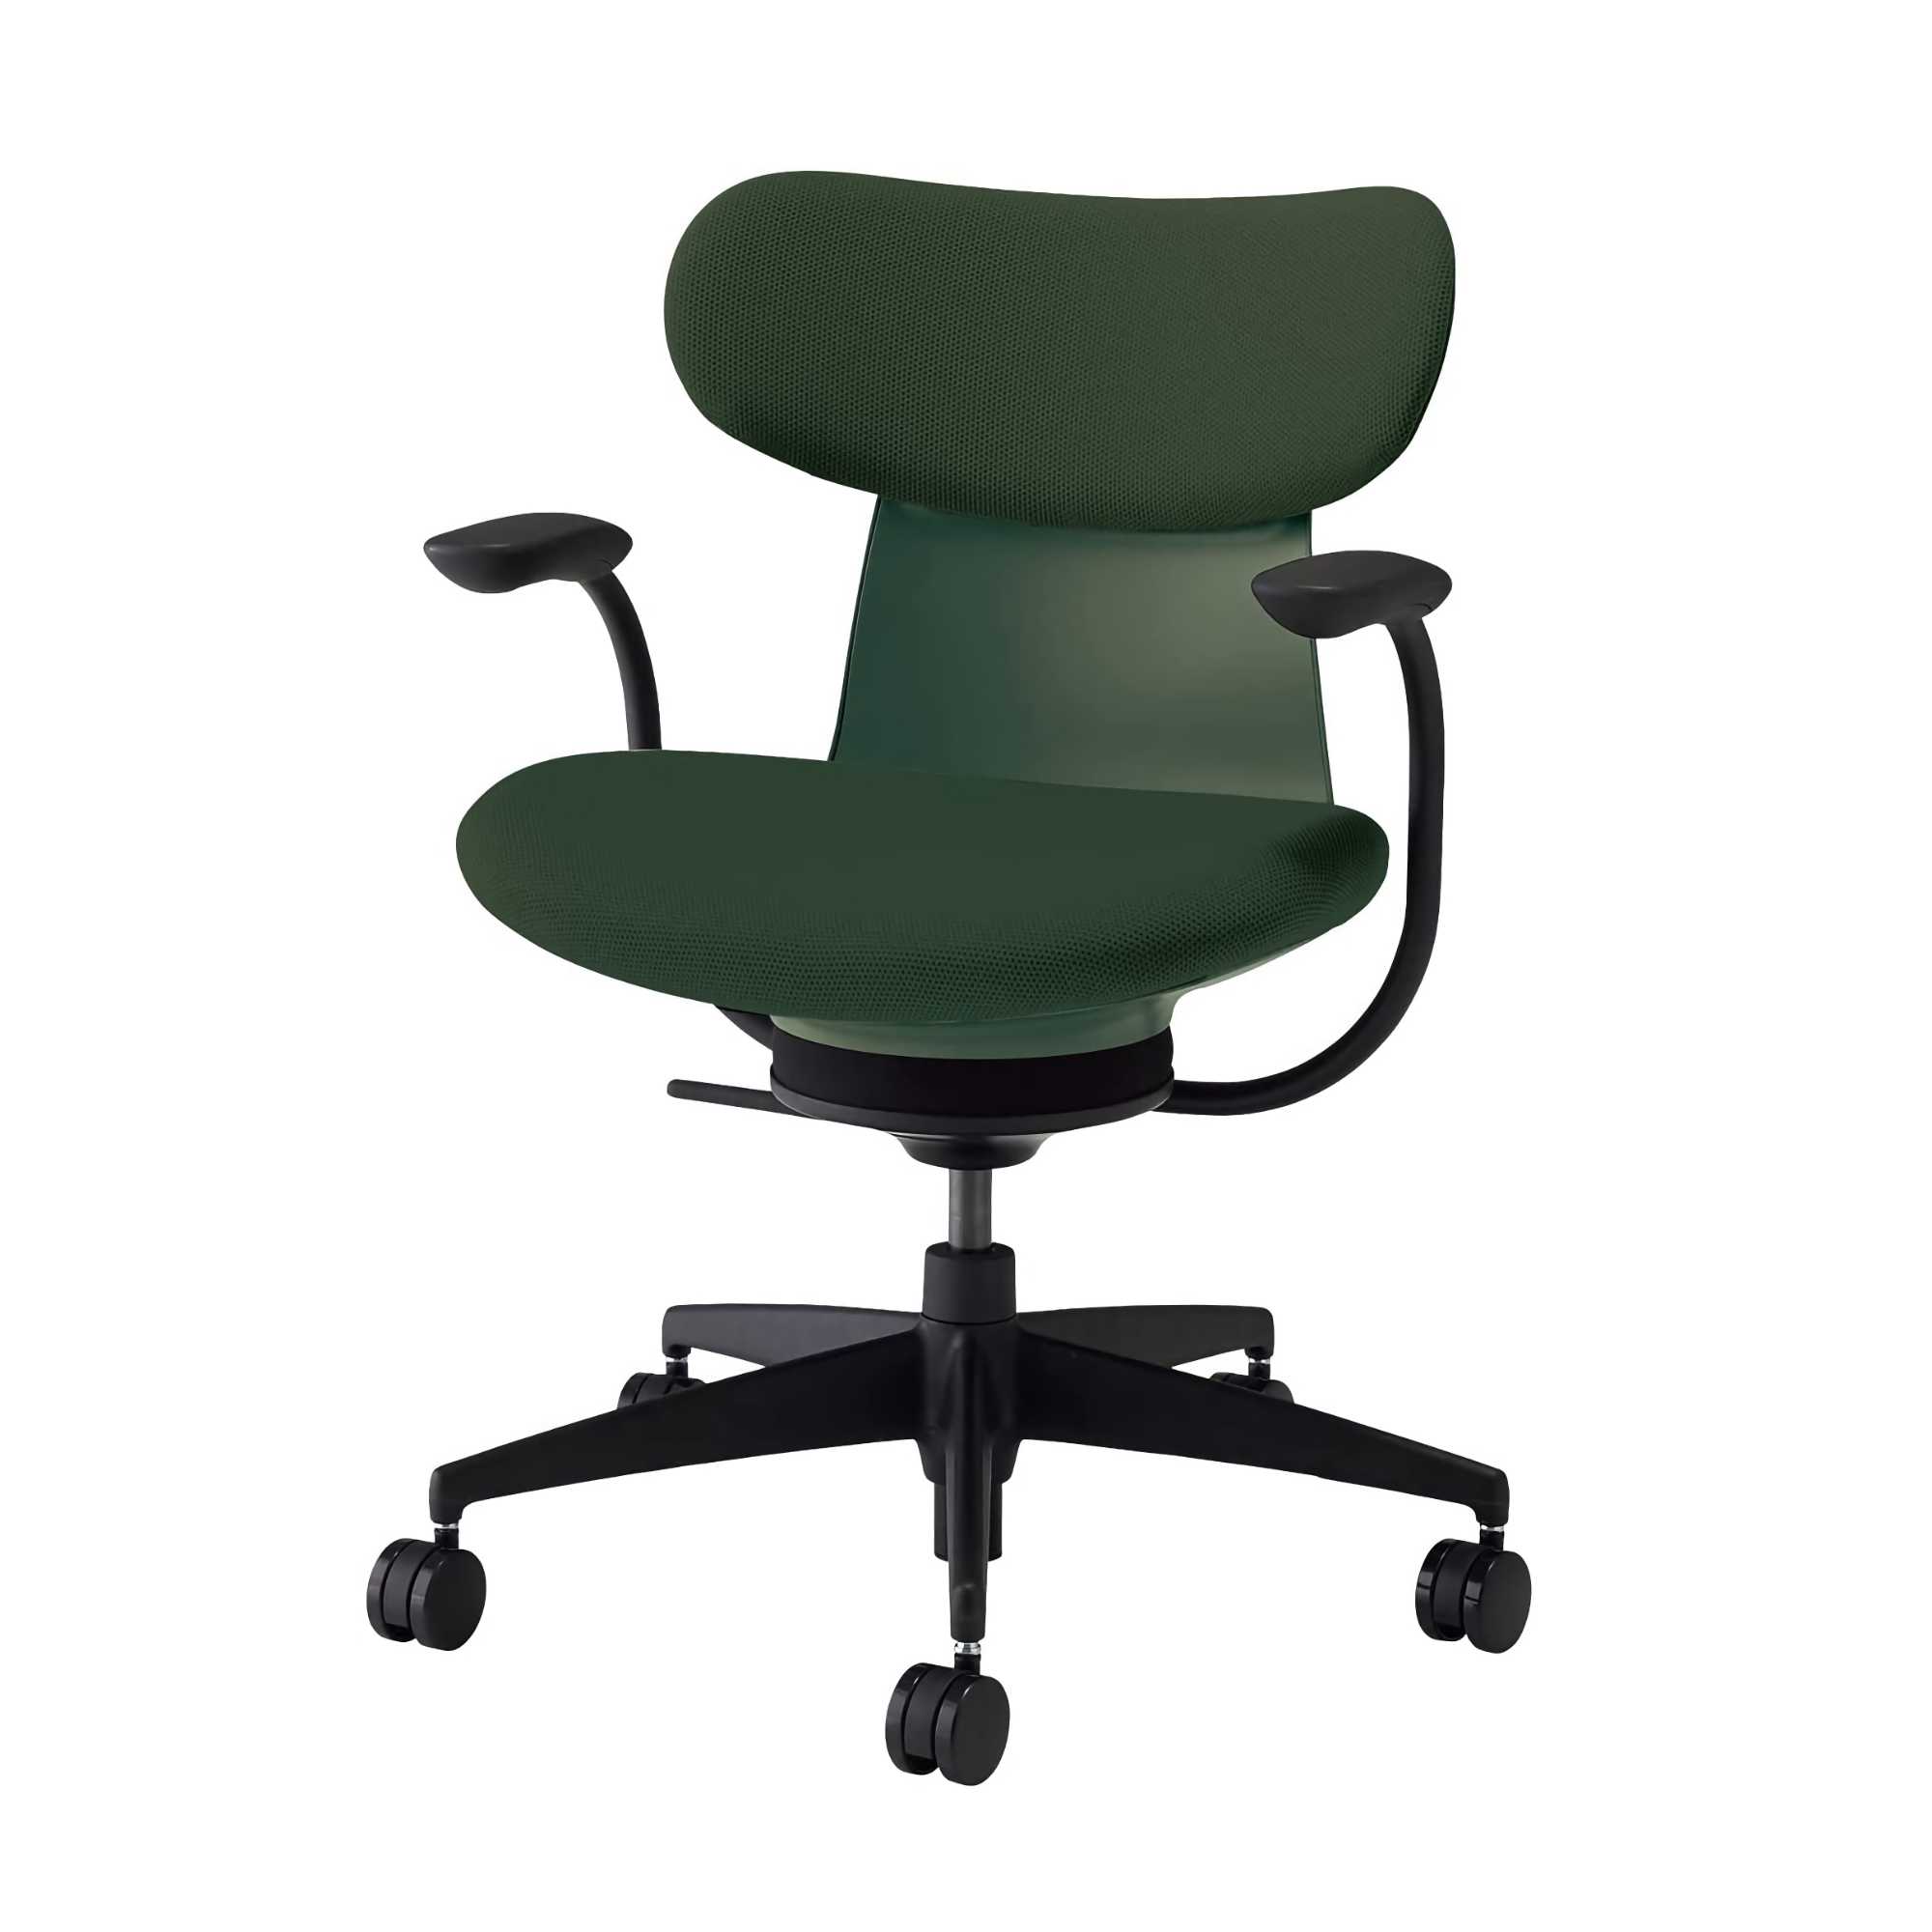 Kokuyo Inglife Office Chair Upholsltery Back with Arm, green